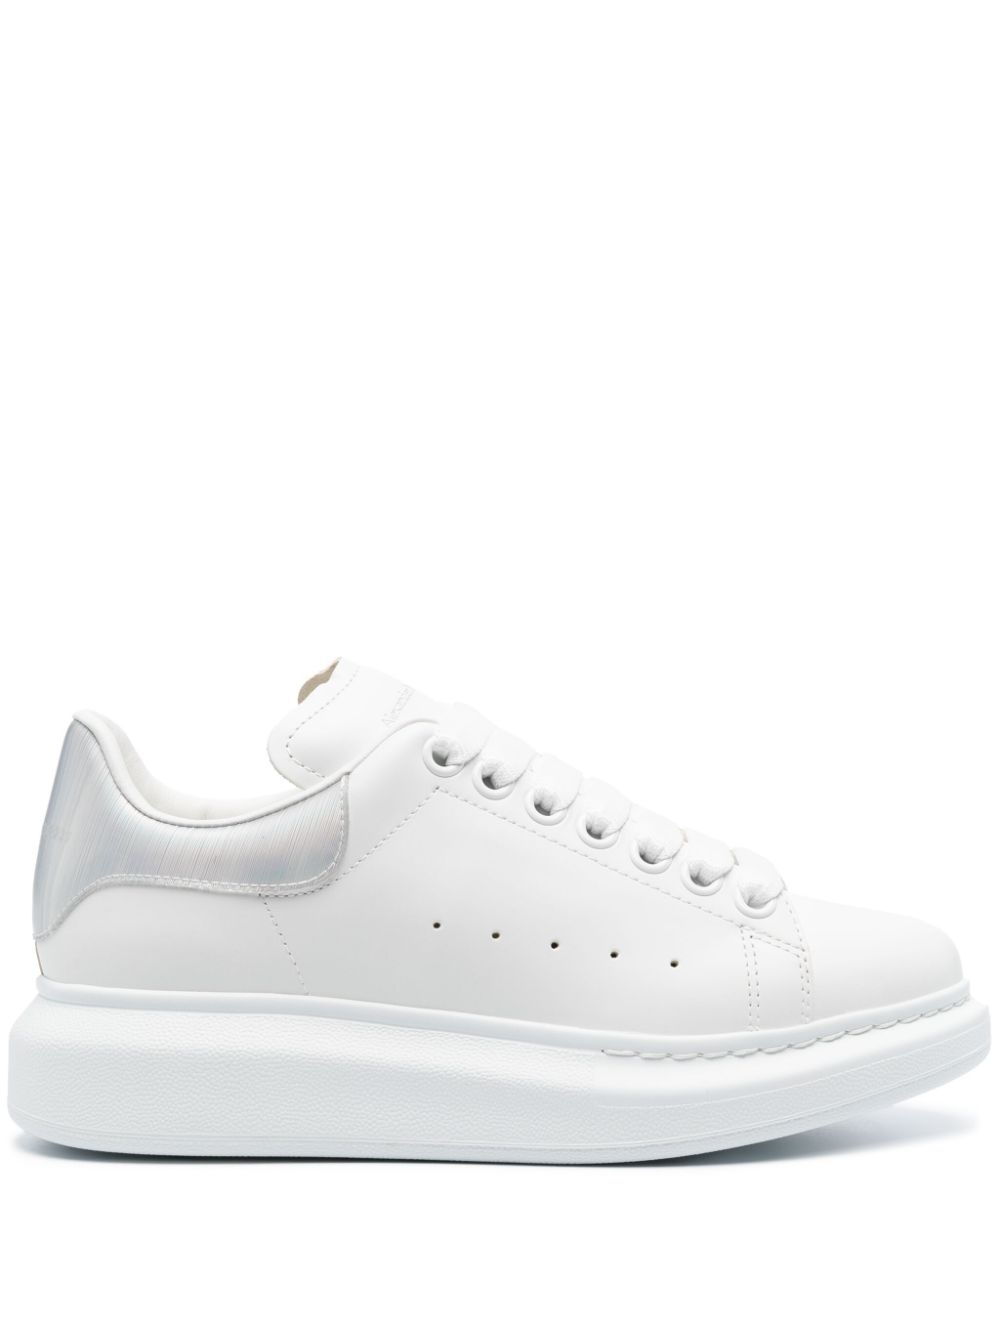 iridescent-panel leather sneakers - 1